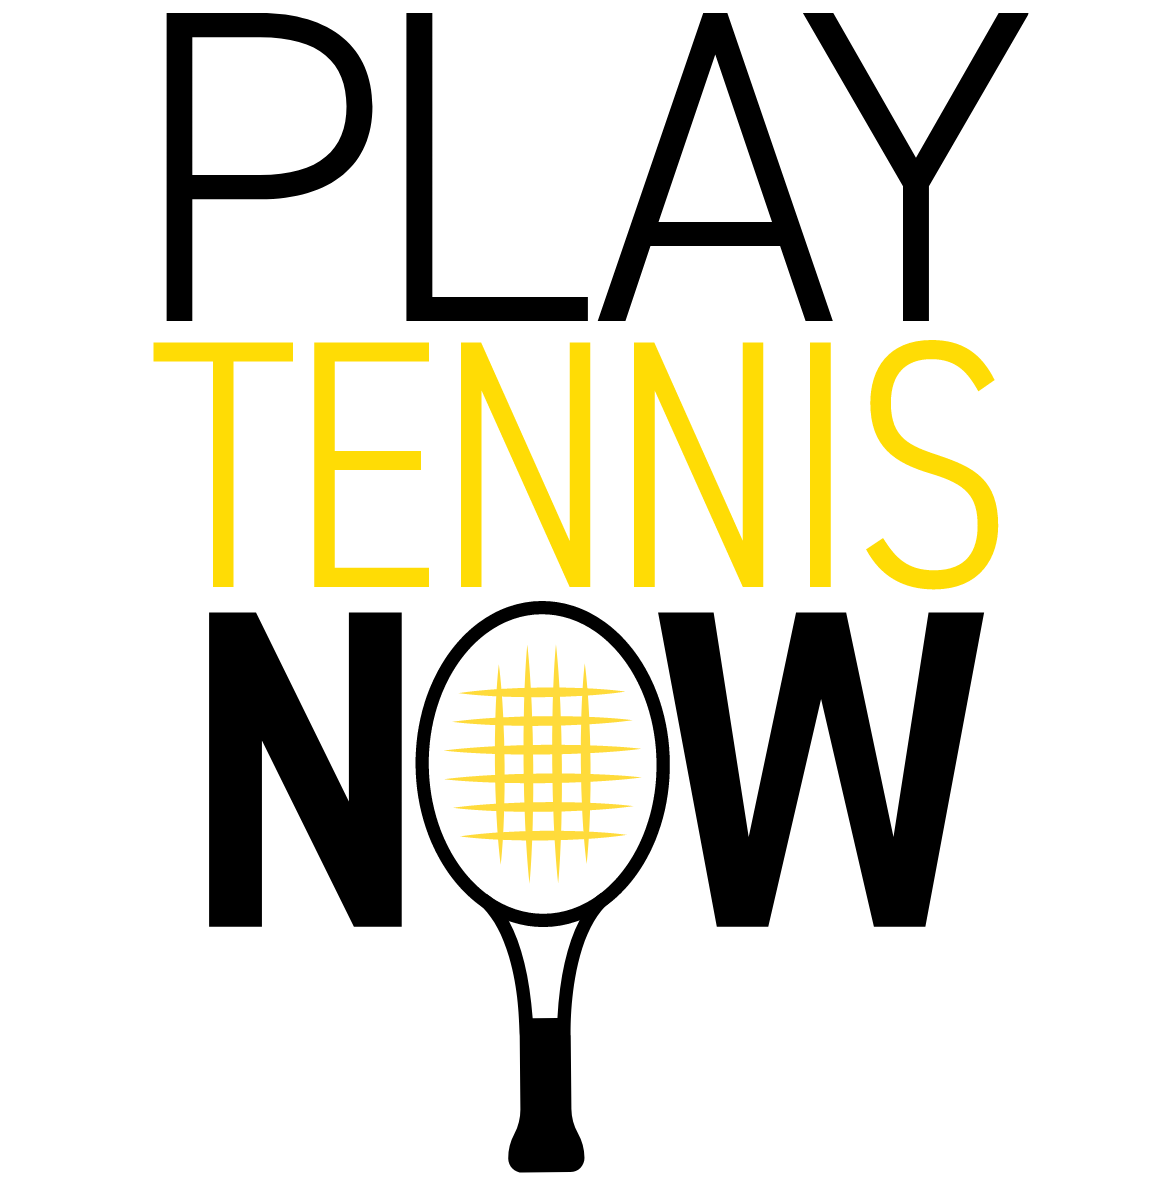 Learn Tennis Beginner Tennis Lessons Learn Tennis Cheap Play Tennis Tennis Lessons Play Tennis CT Connecticut Stamford New Haven Hartford Covid Tennis Tennis Blog Tennis Lessons